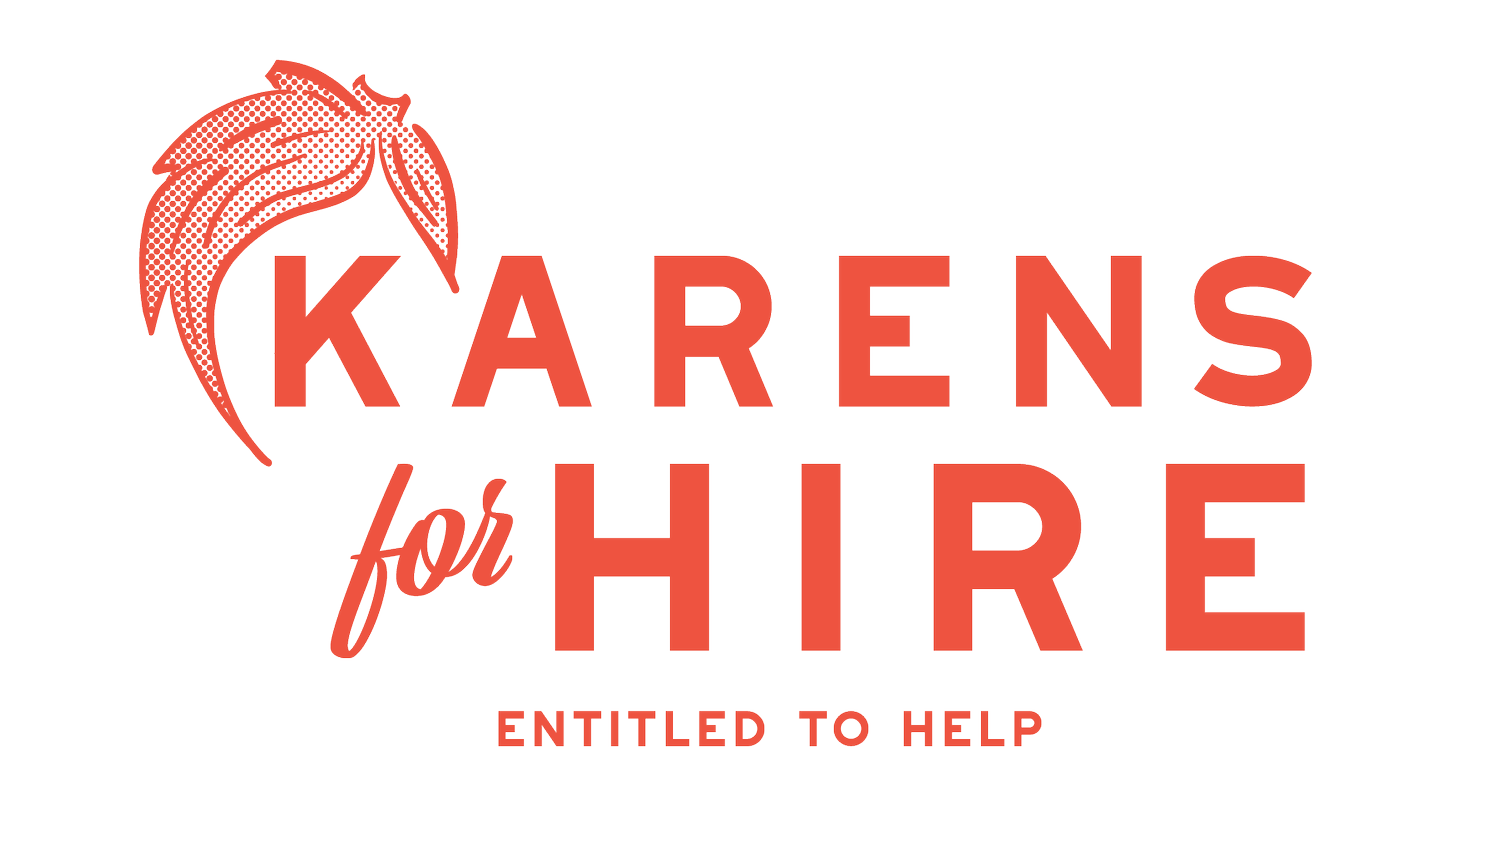 karens for hire